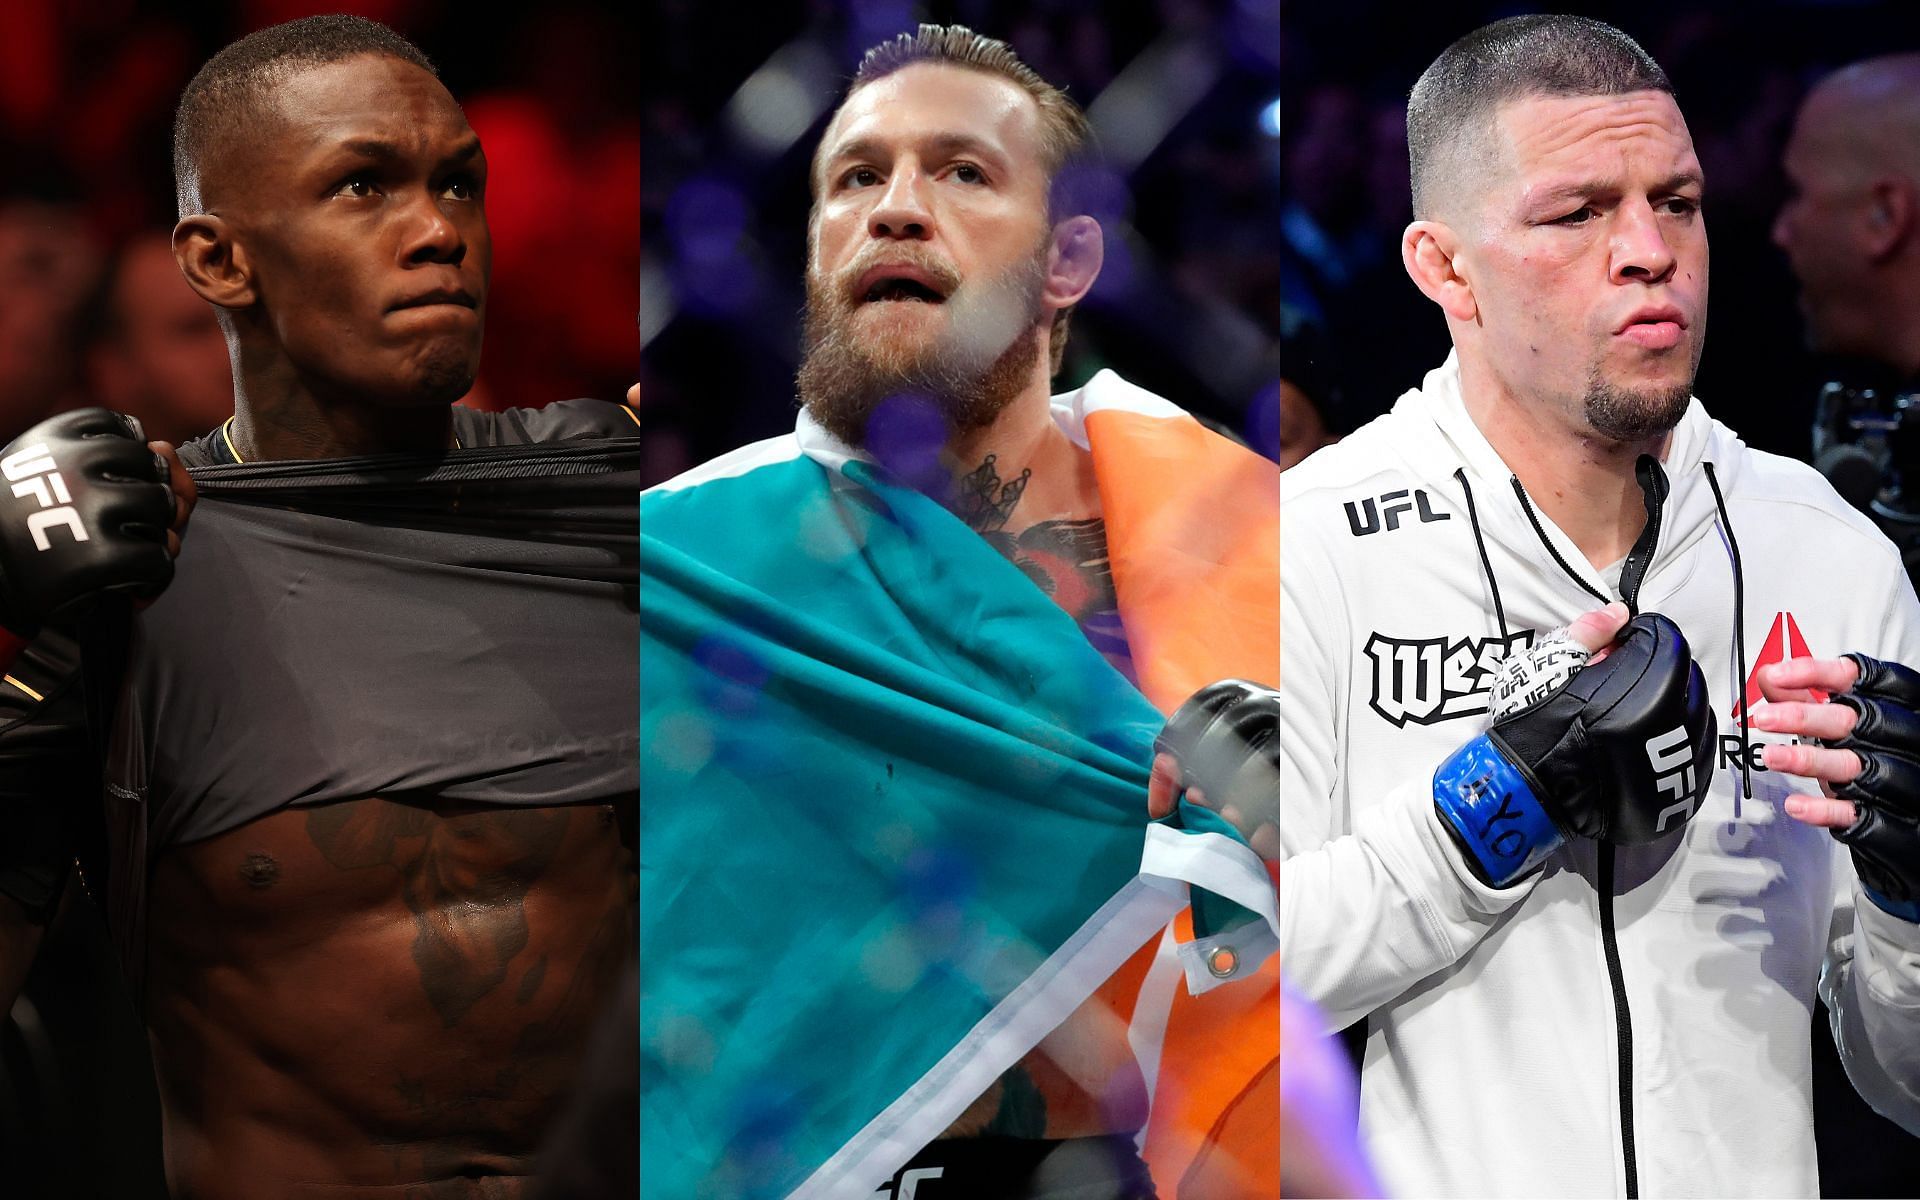 Israel Adesanya (Left); Conor McGregor (Middle); Nate Diaz (Right) [*Image courtesy: Getty Images]